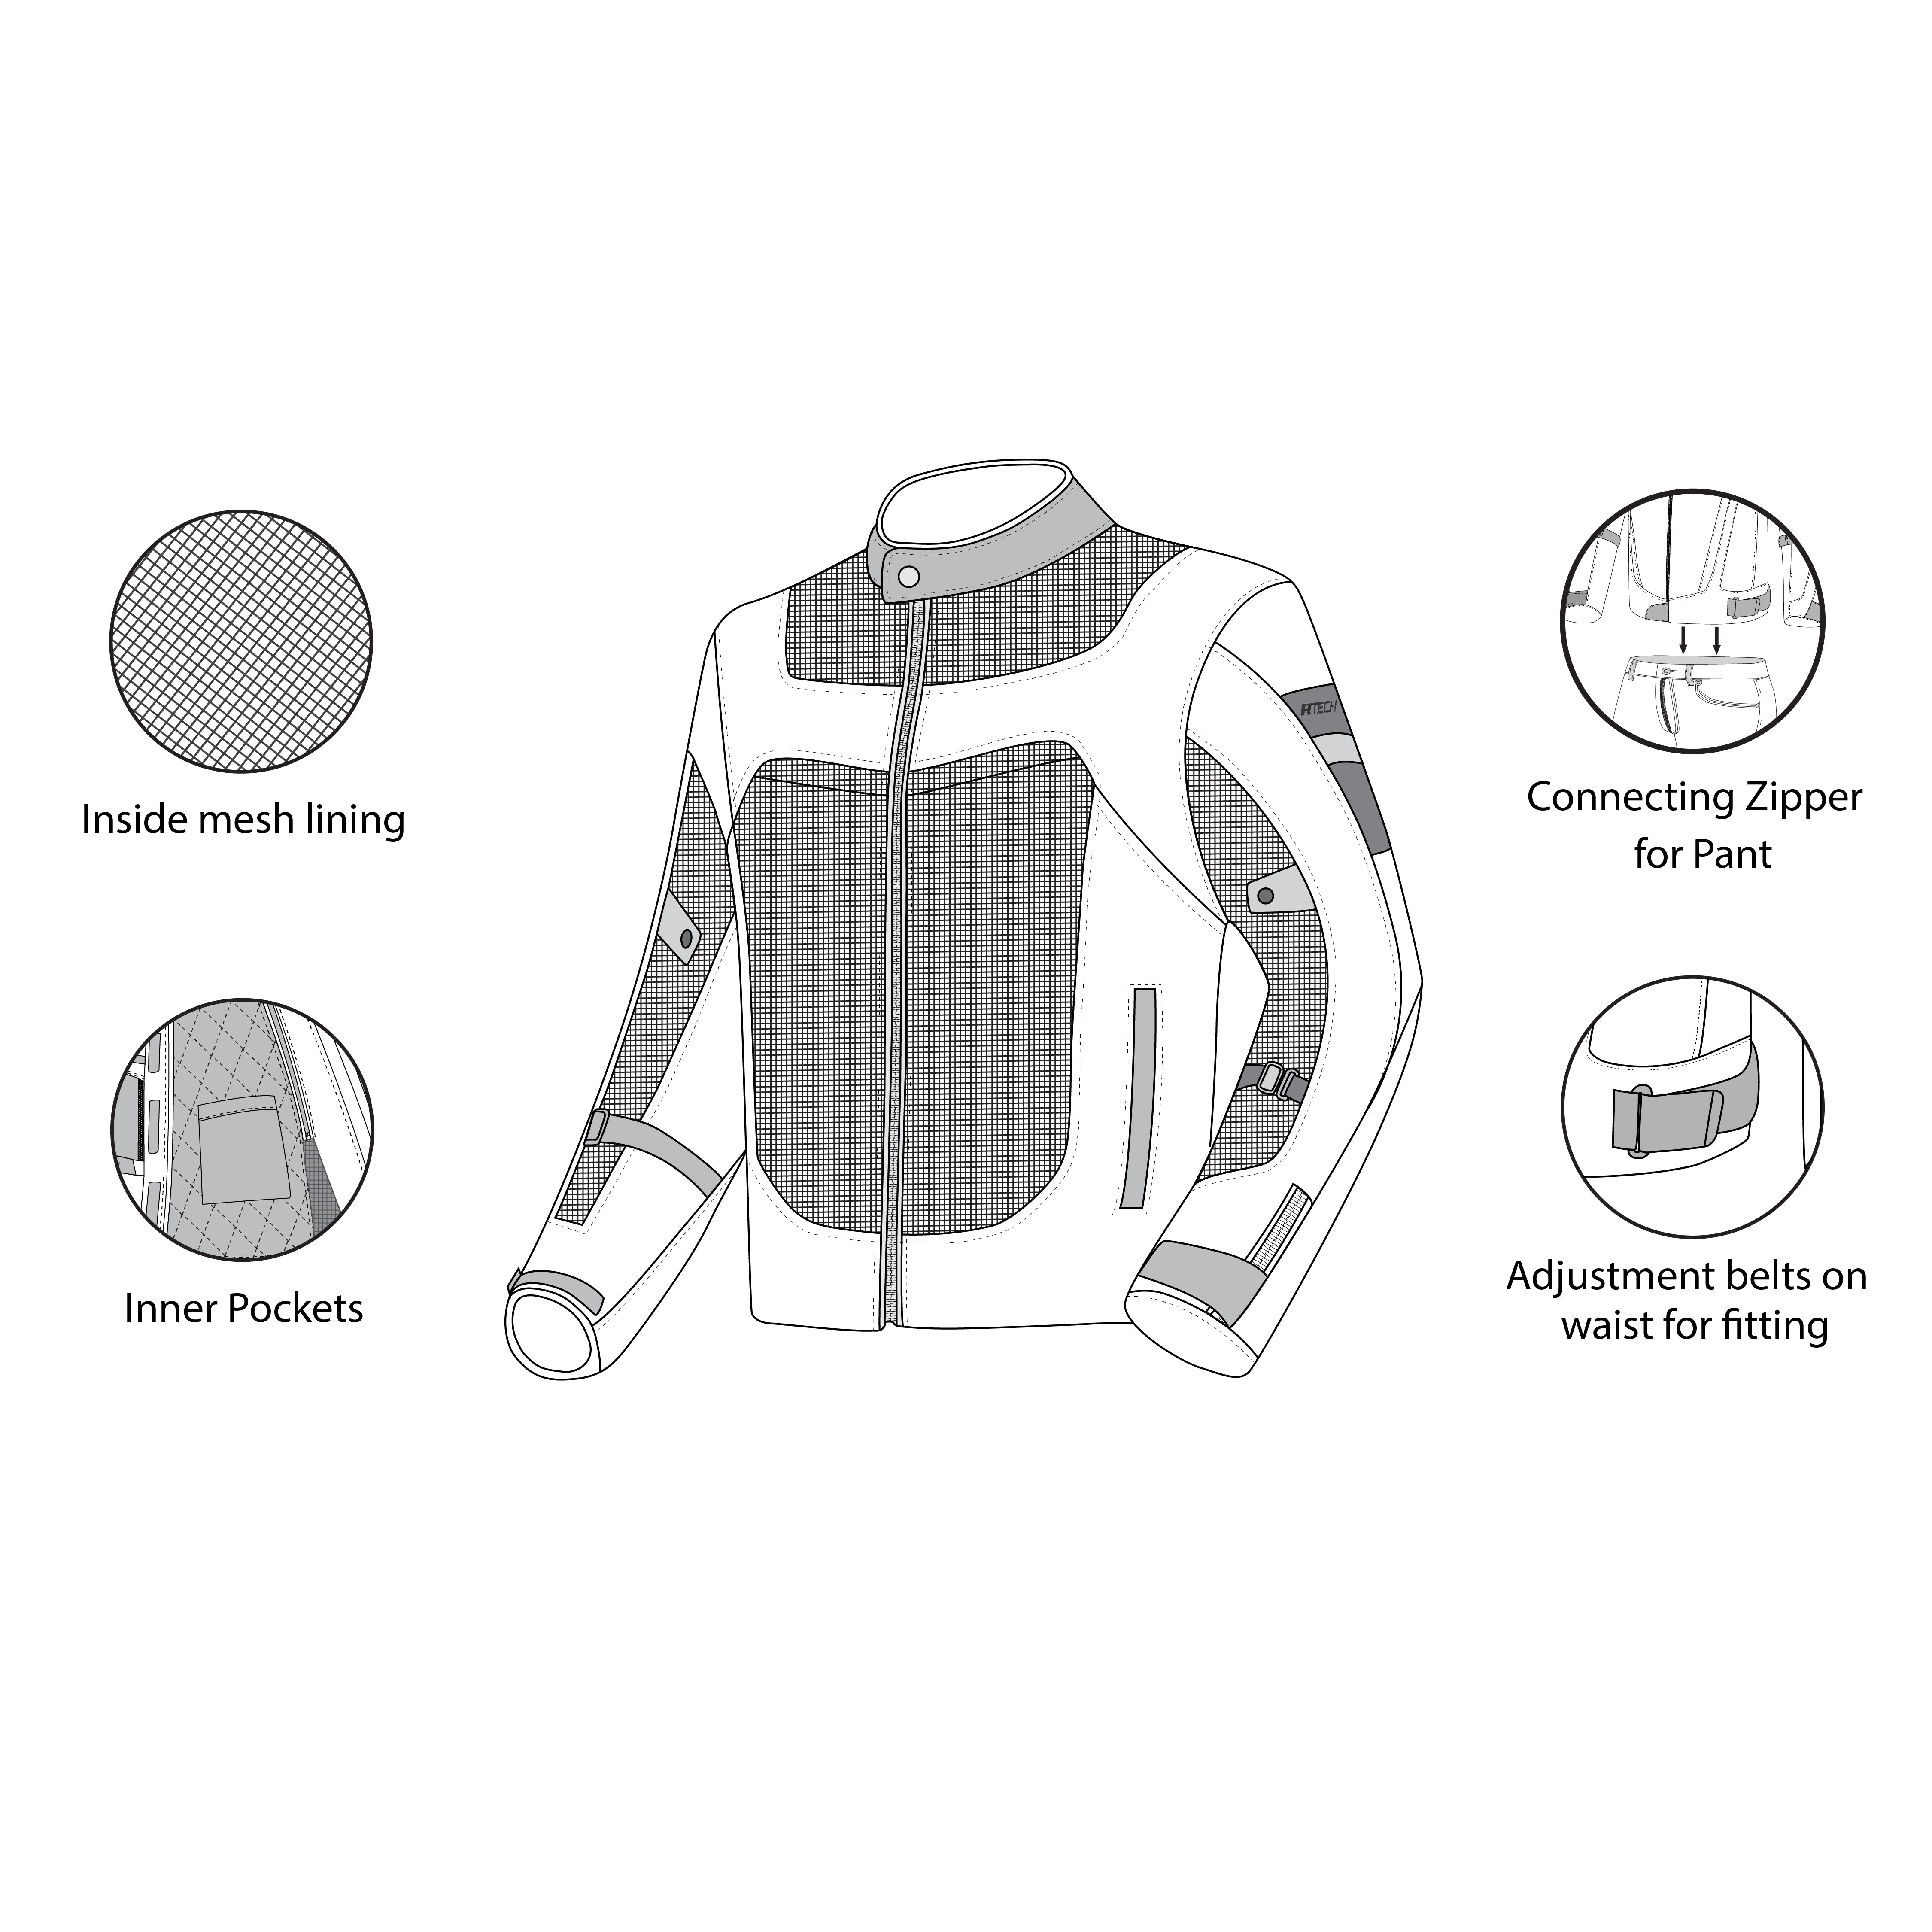 infographic sketch r-tech spiral mesh textile jacket mud-grey and red top front side view